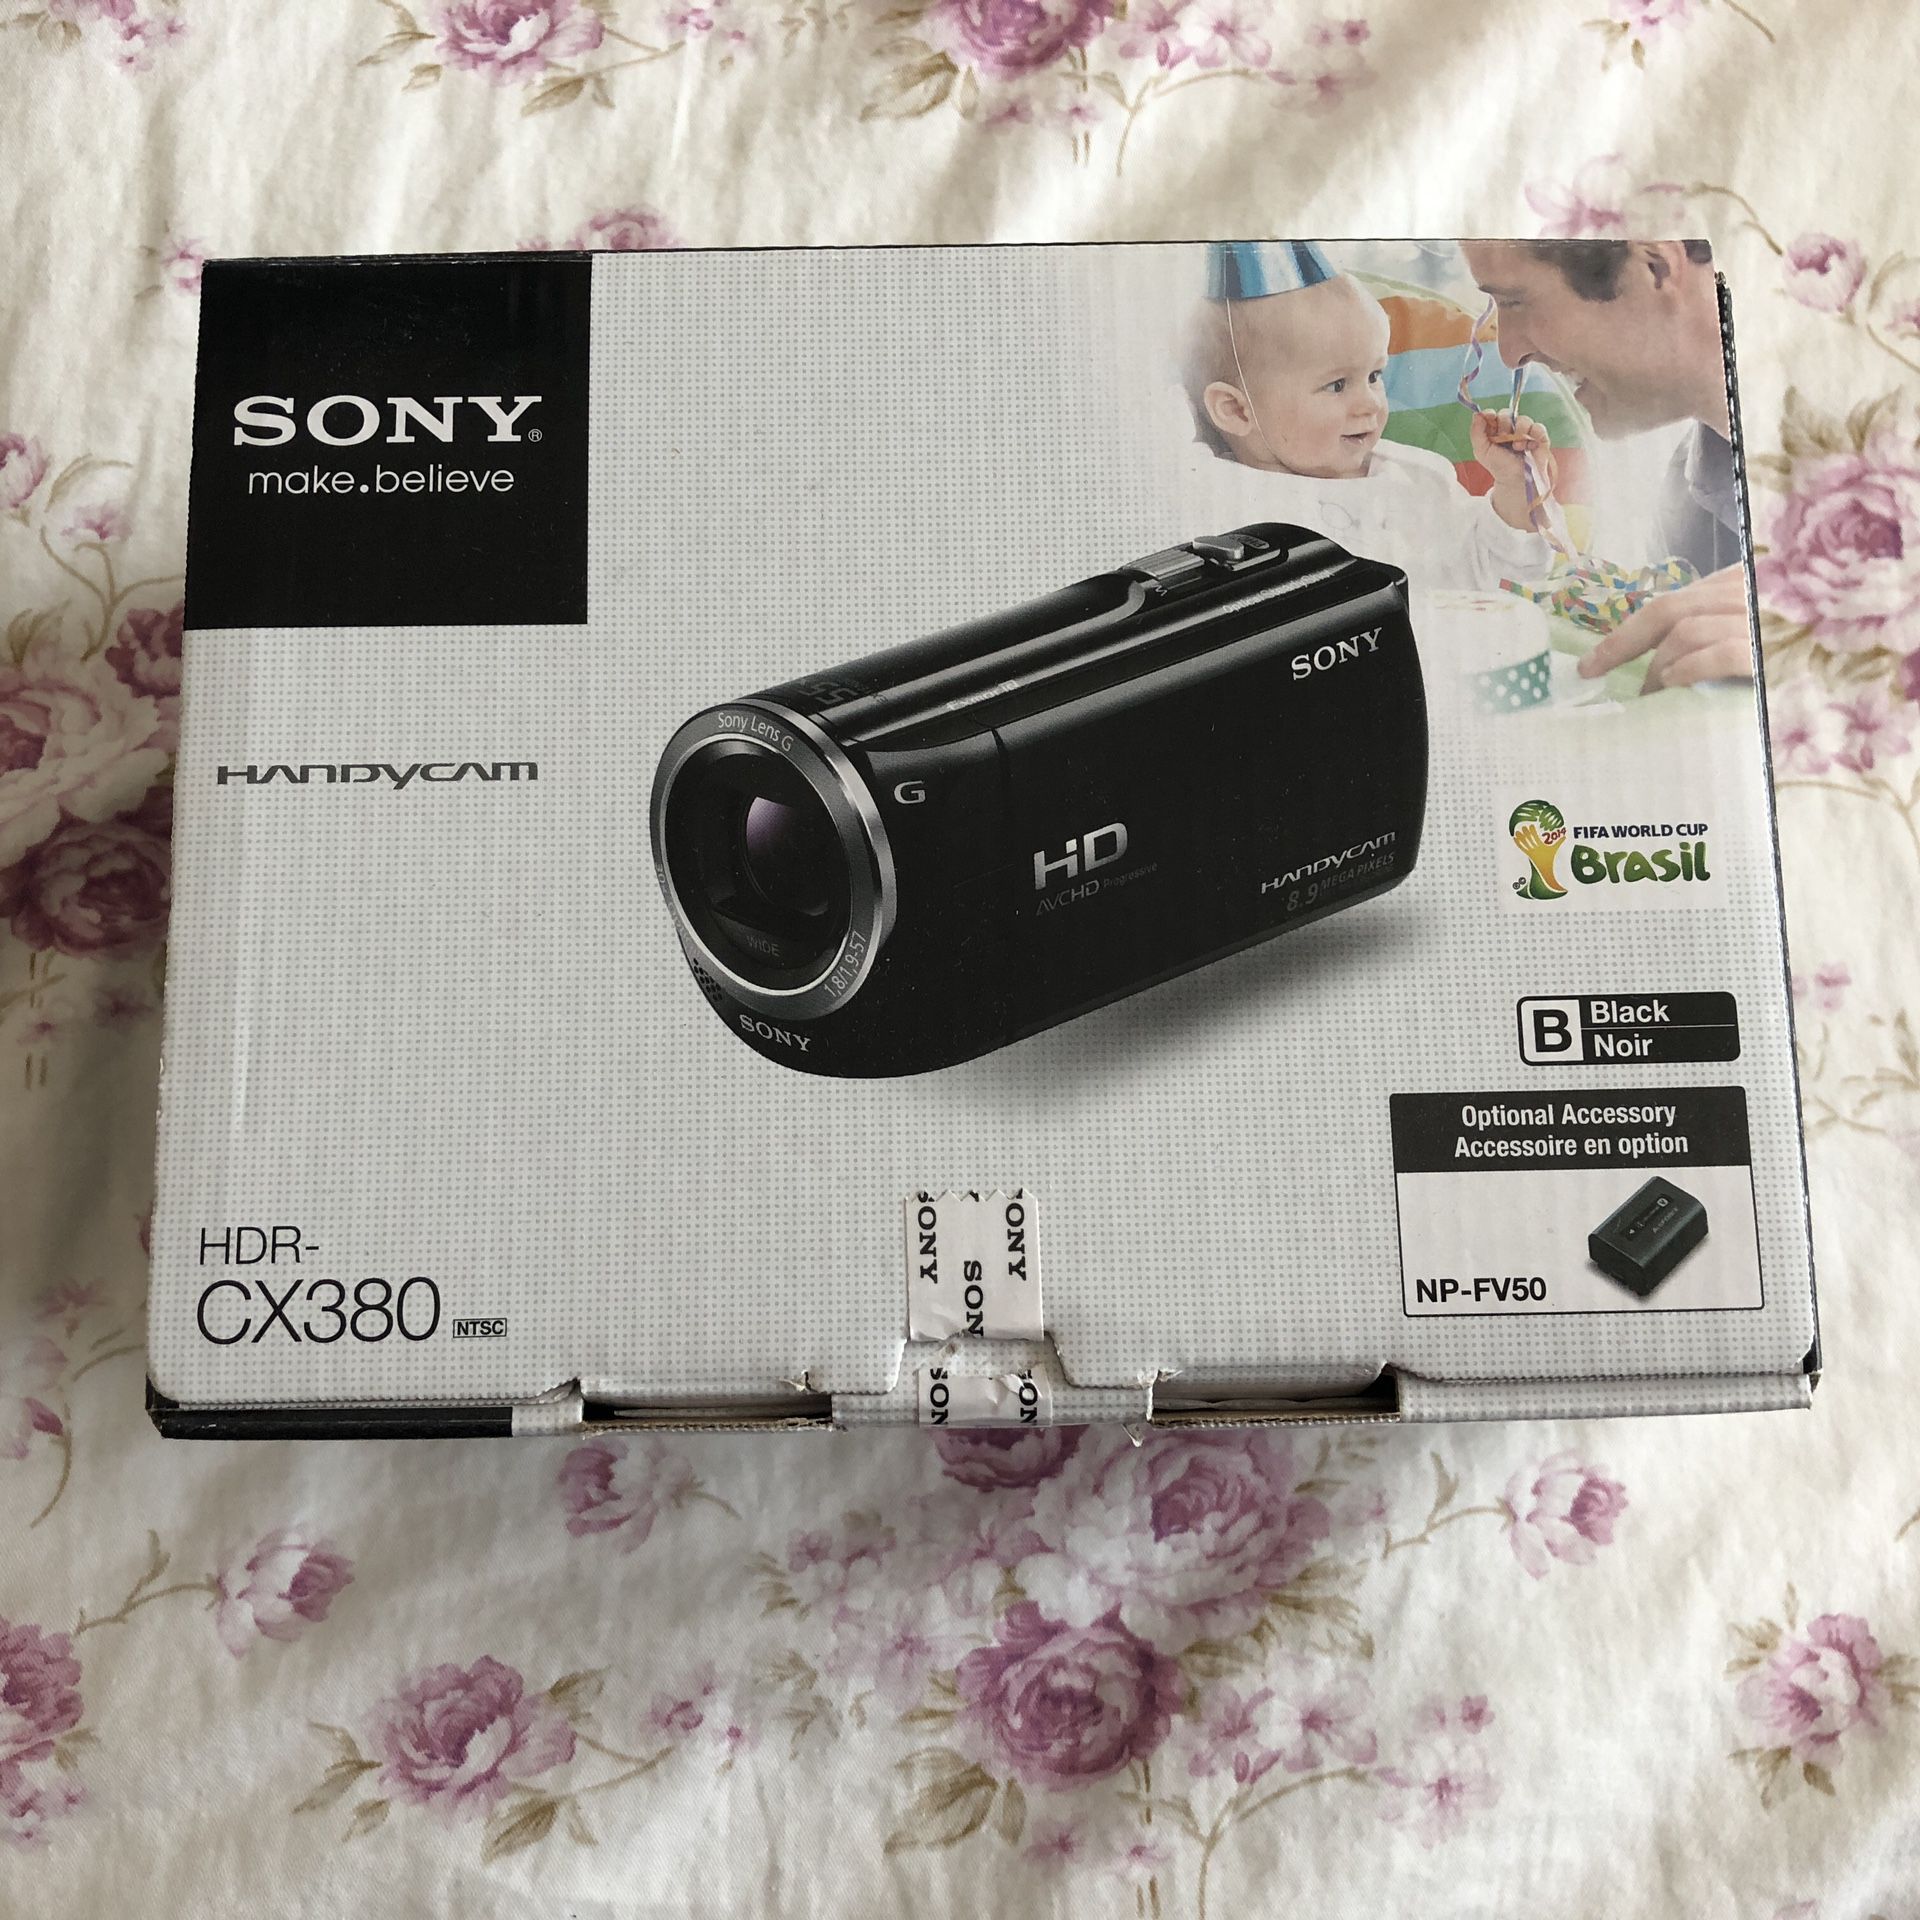 Sony Handycam HDR-CX380 Camcorder and Case